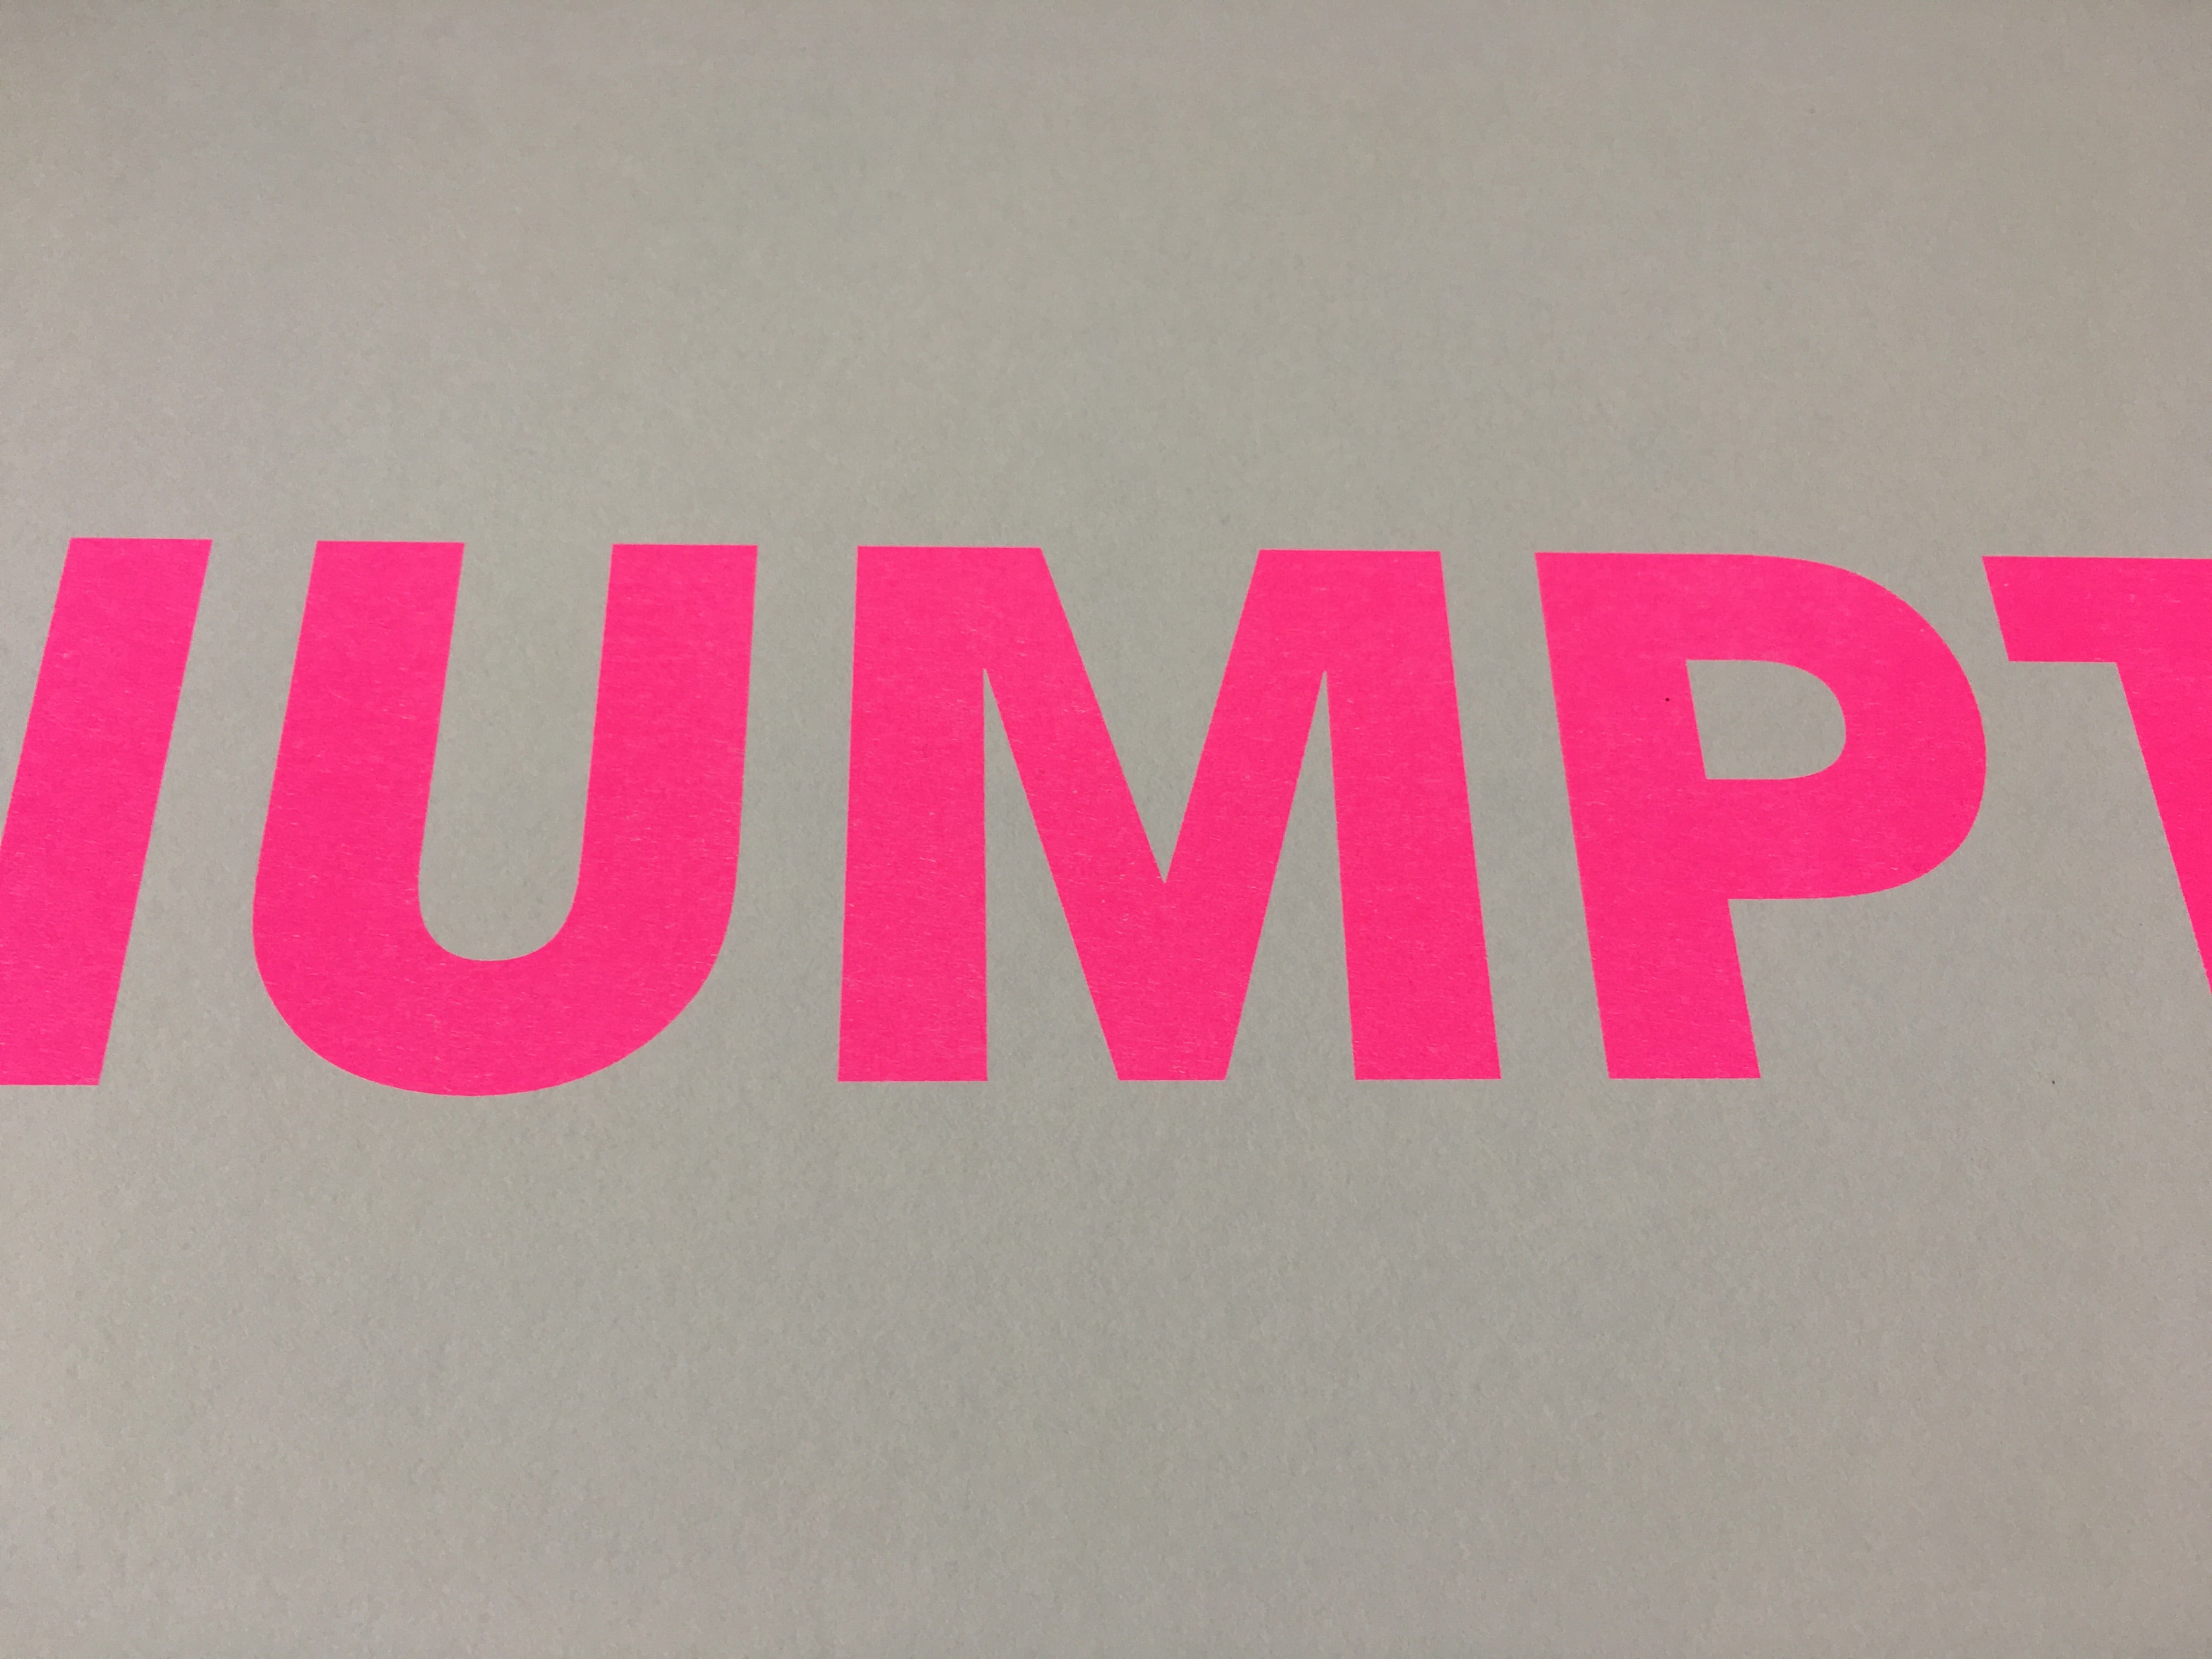 A3 NUMPTY RISO PRINT - POMPEY TYPE SERIES - foursandeights